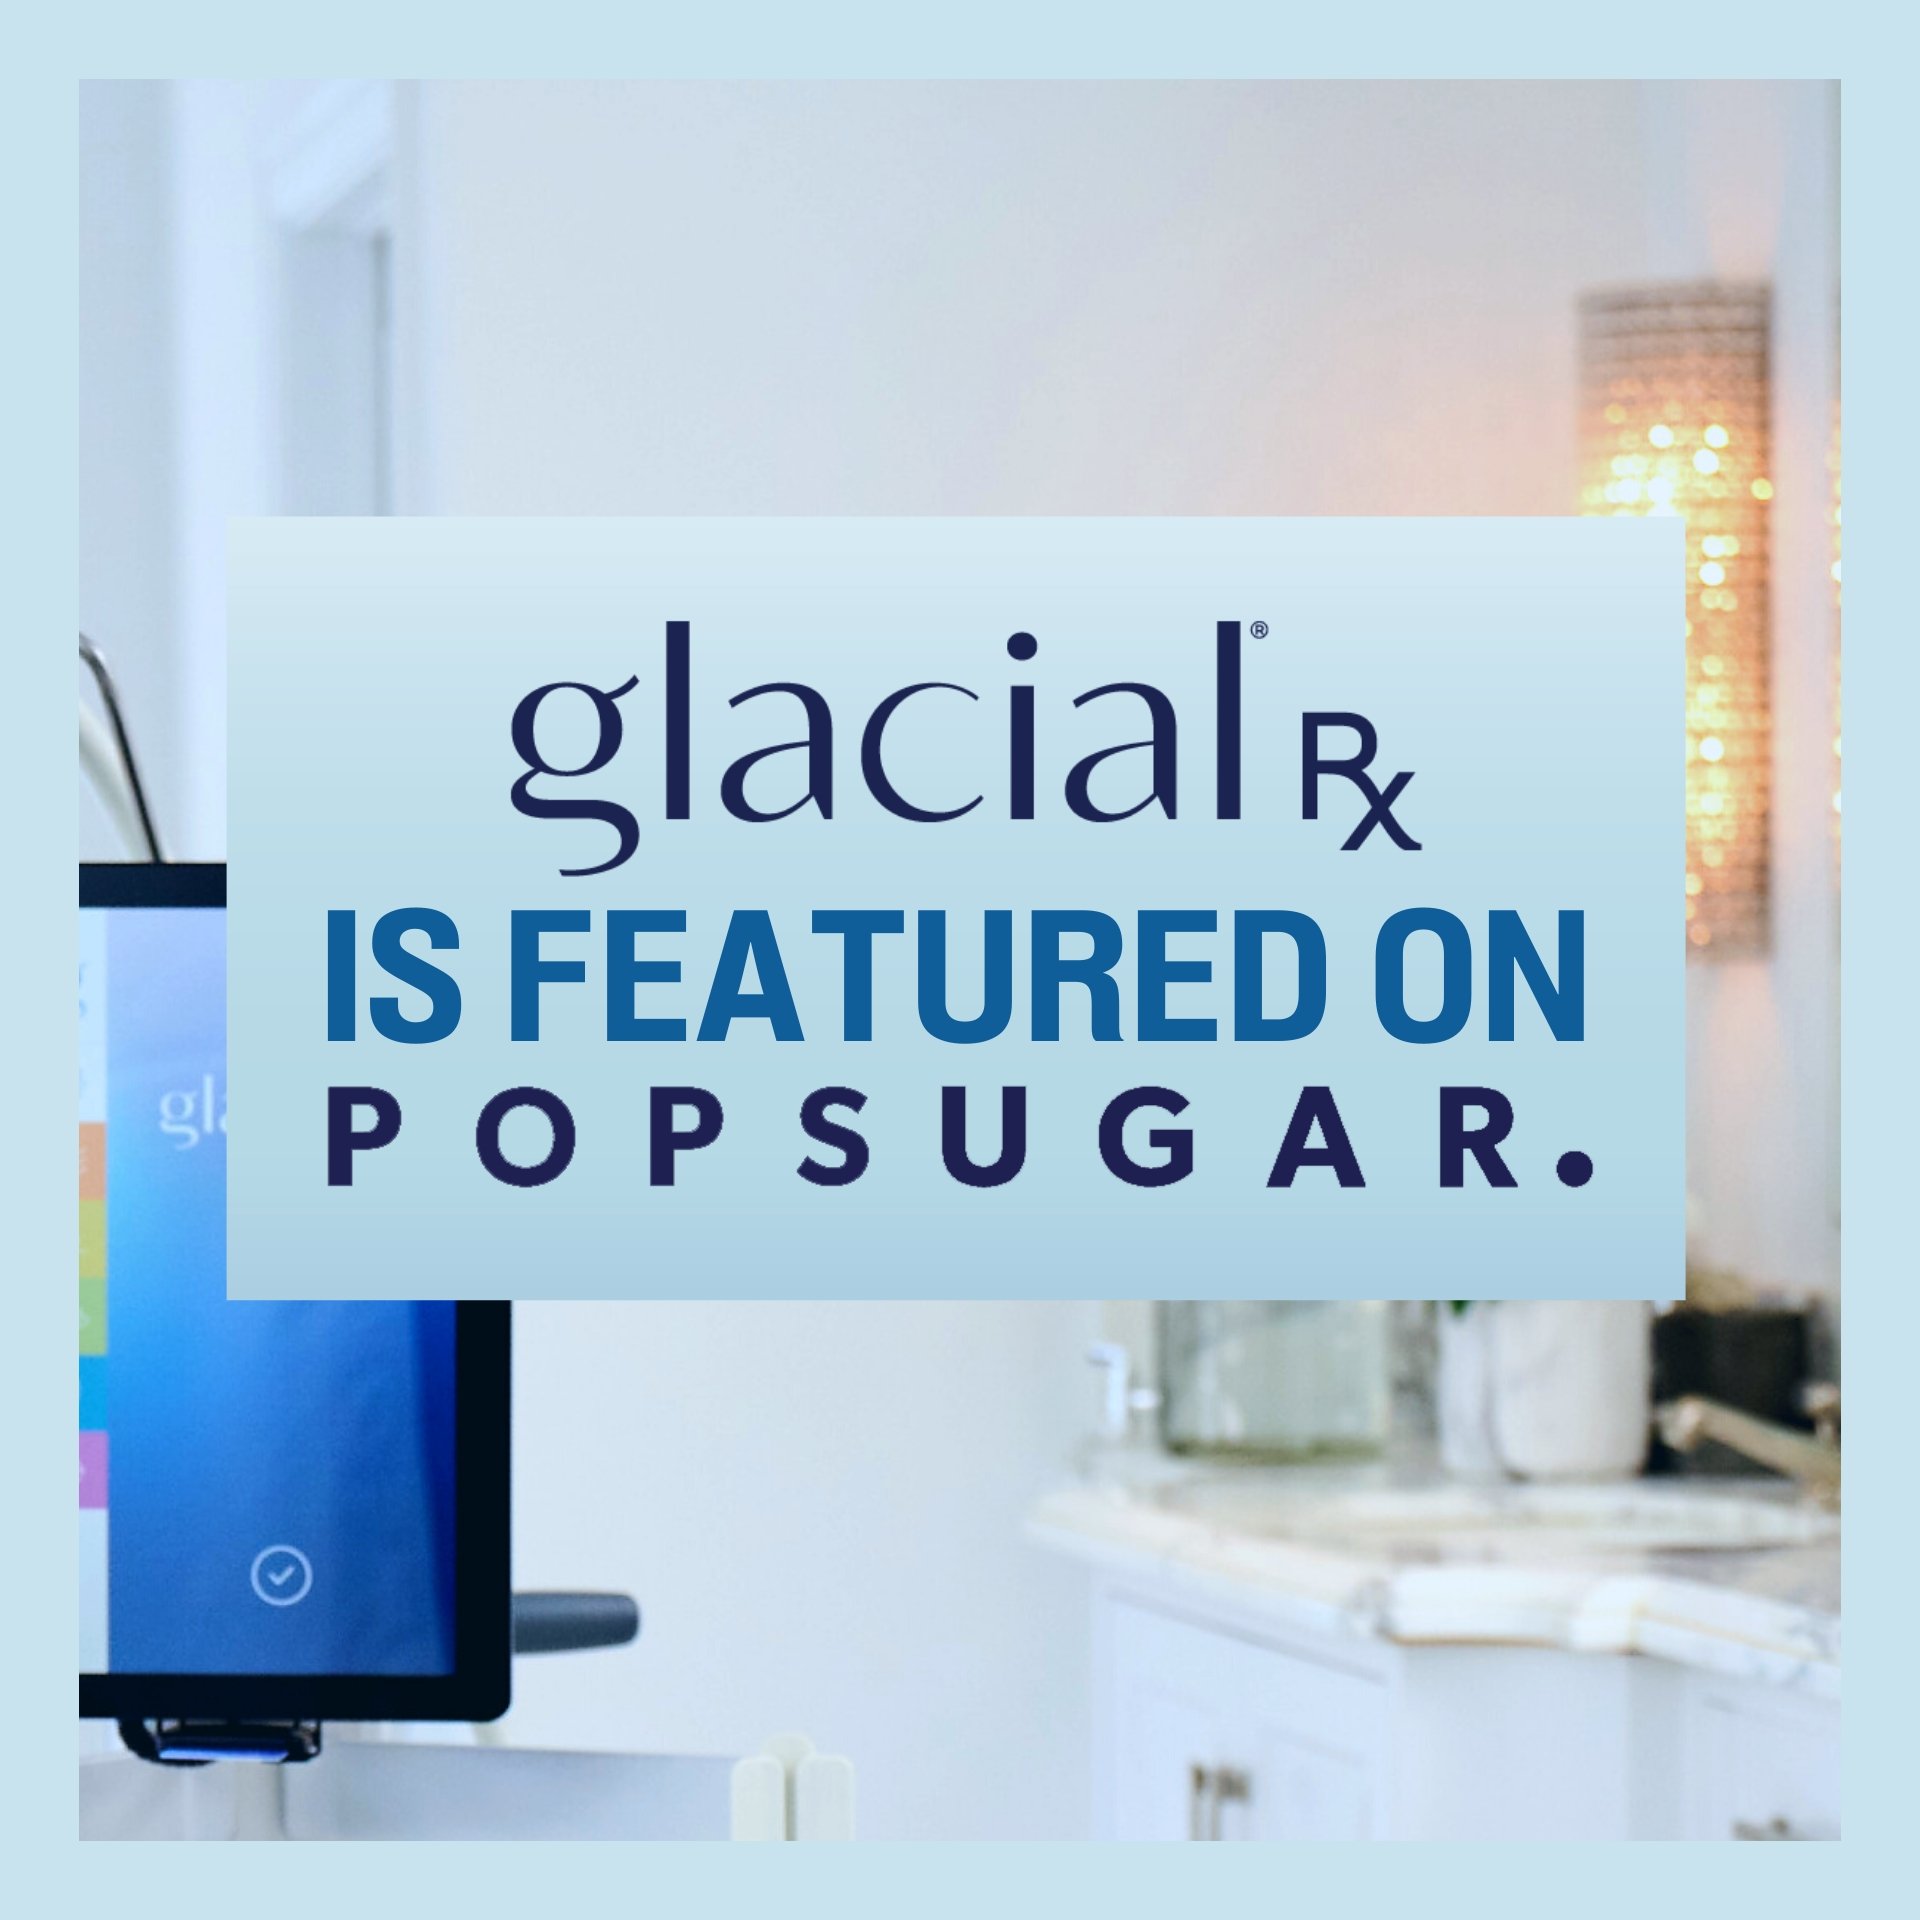 Glacial Rx is featured on Popsugar